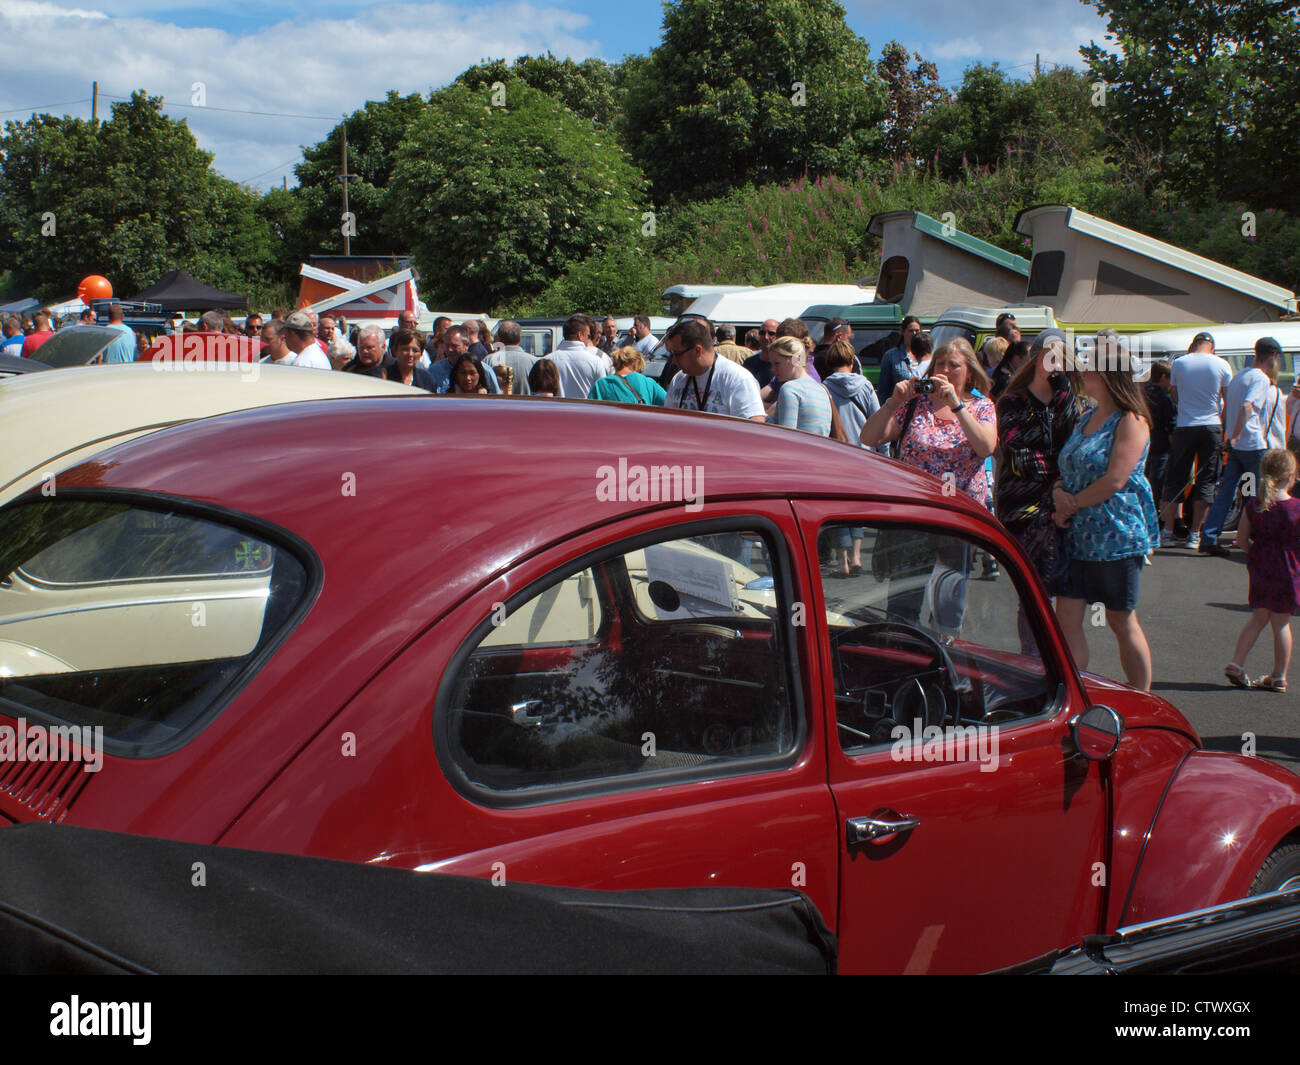 Crowds of people gathering at a vintage Volkswagen classic Car and Van festival in Northern England. Stock Photo